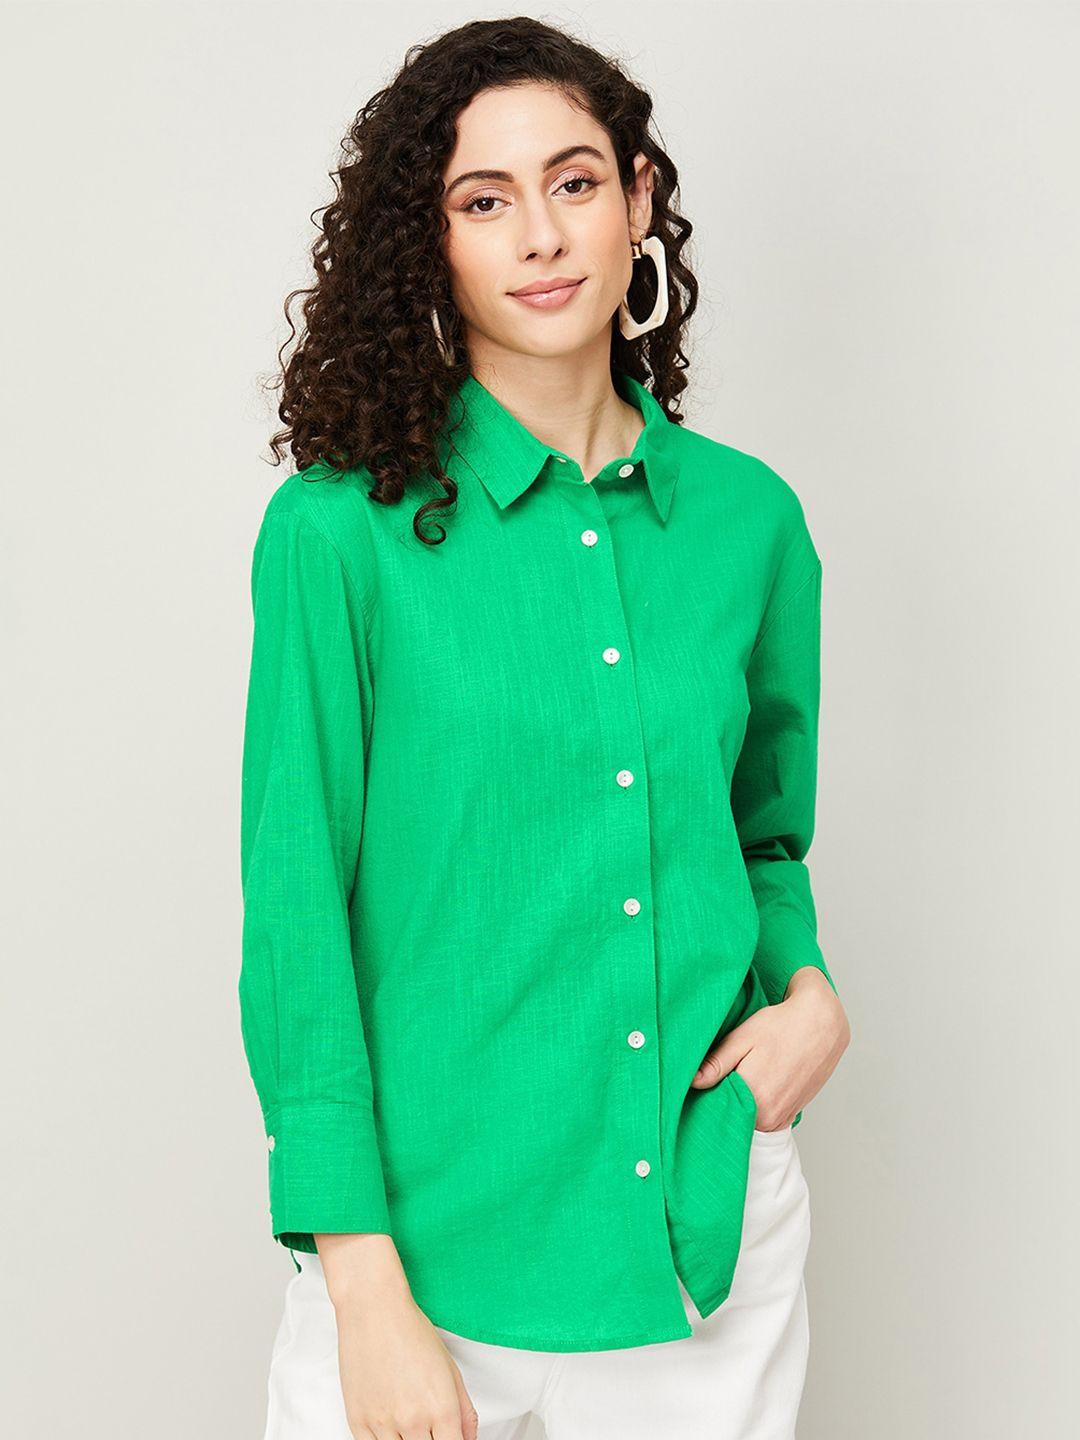 ginger by lifestyle cuffed sleeves shirt style top